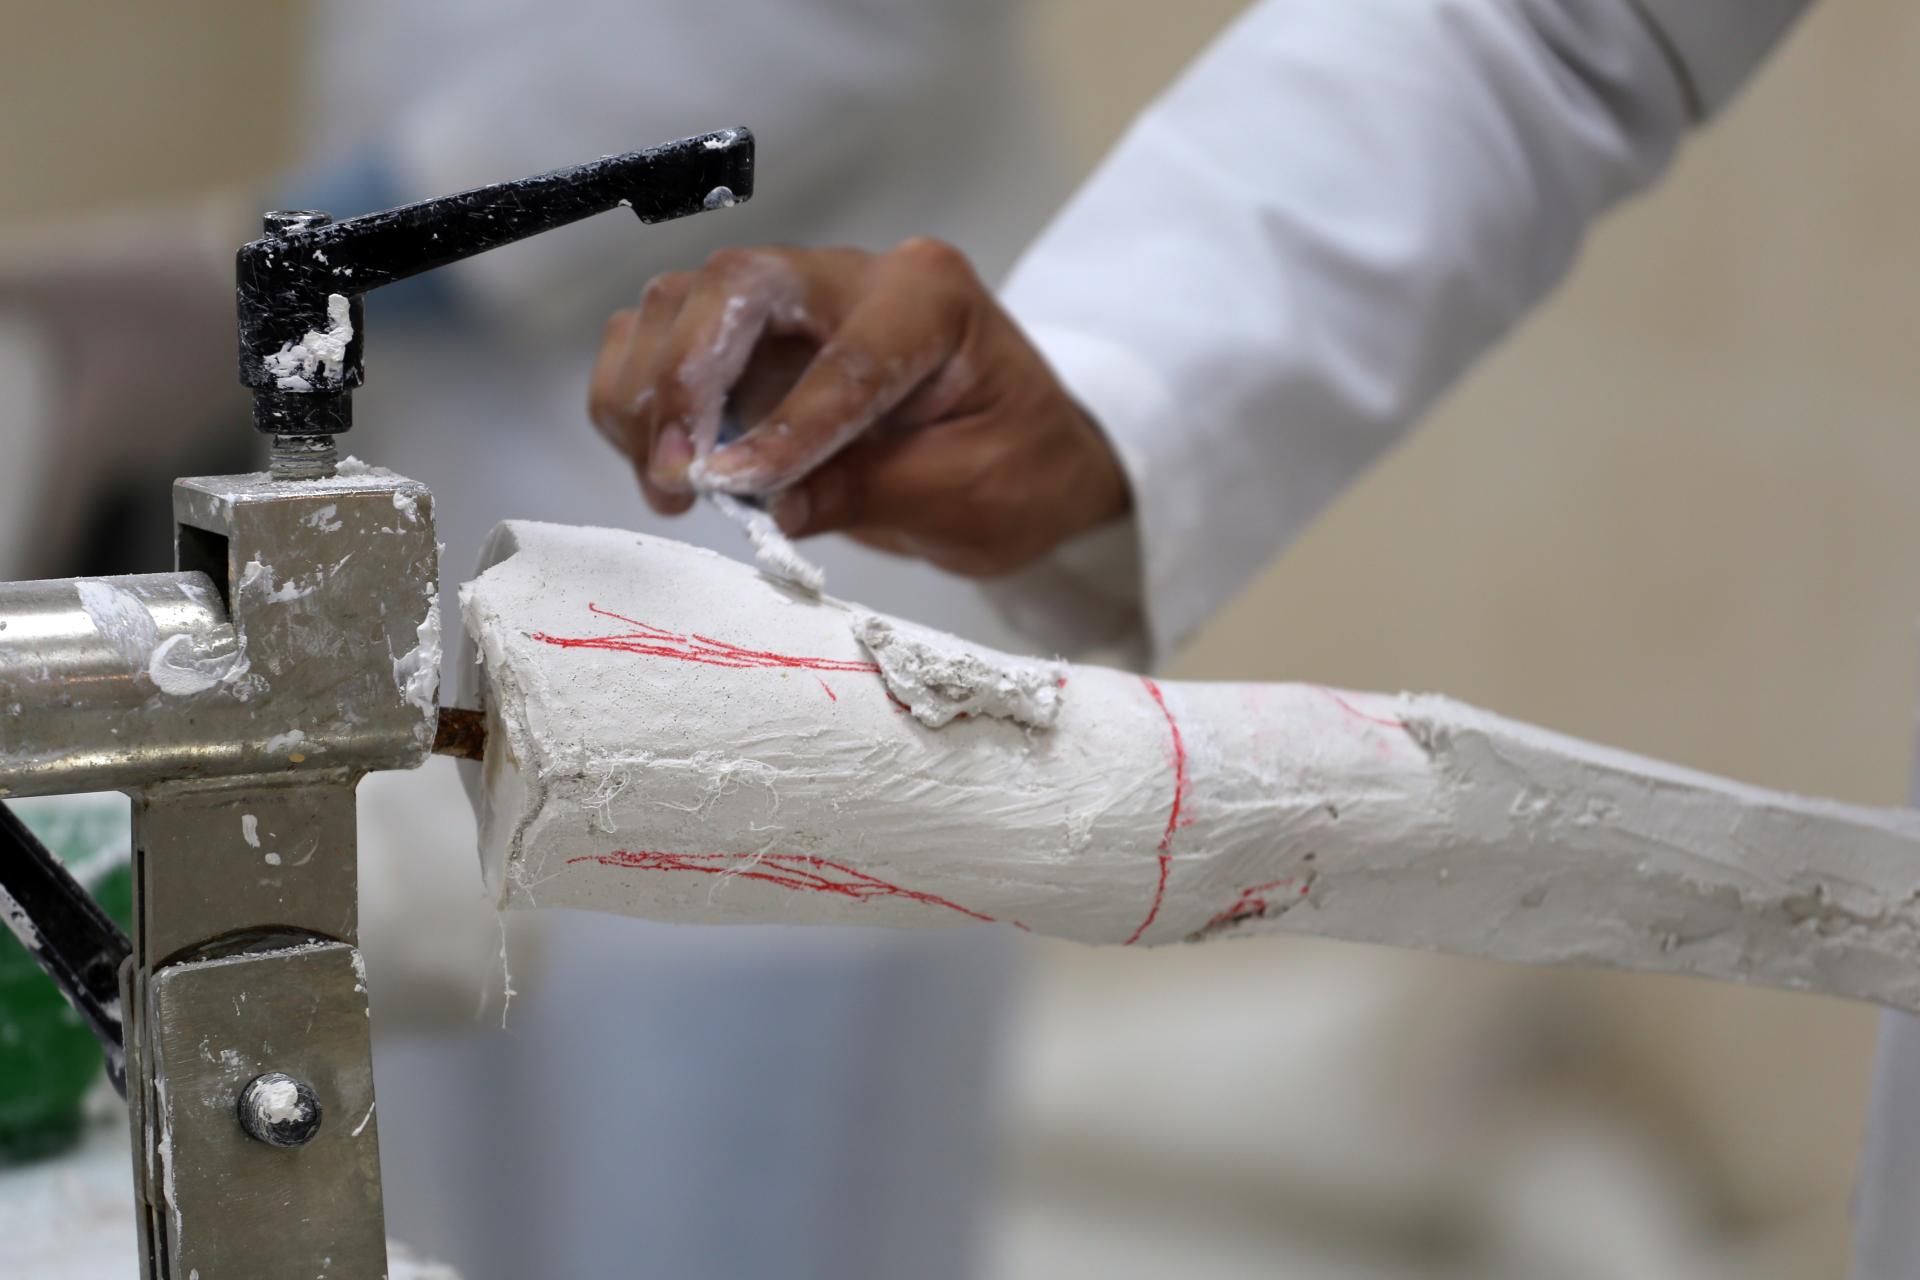 A prosthetic limb being casted